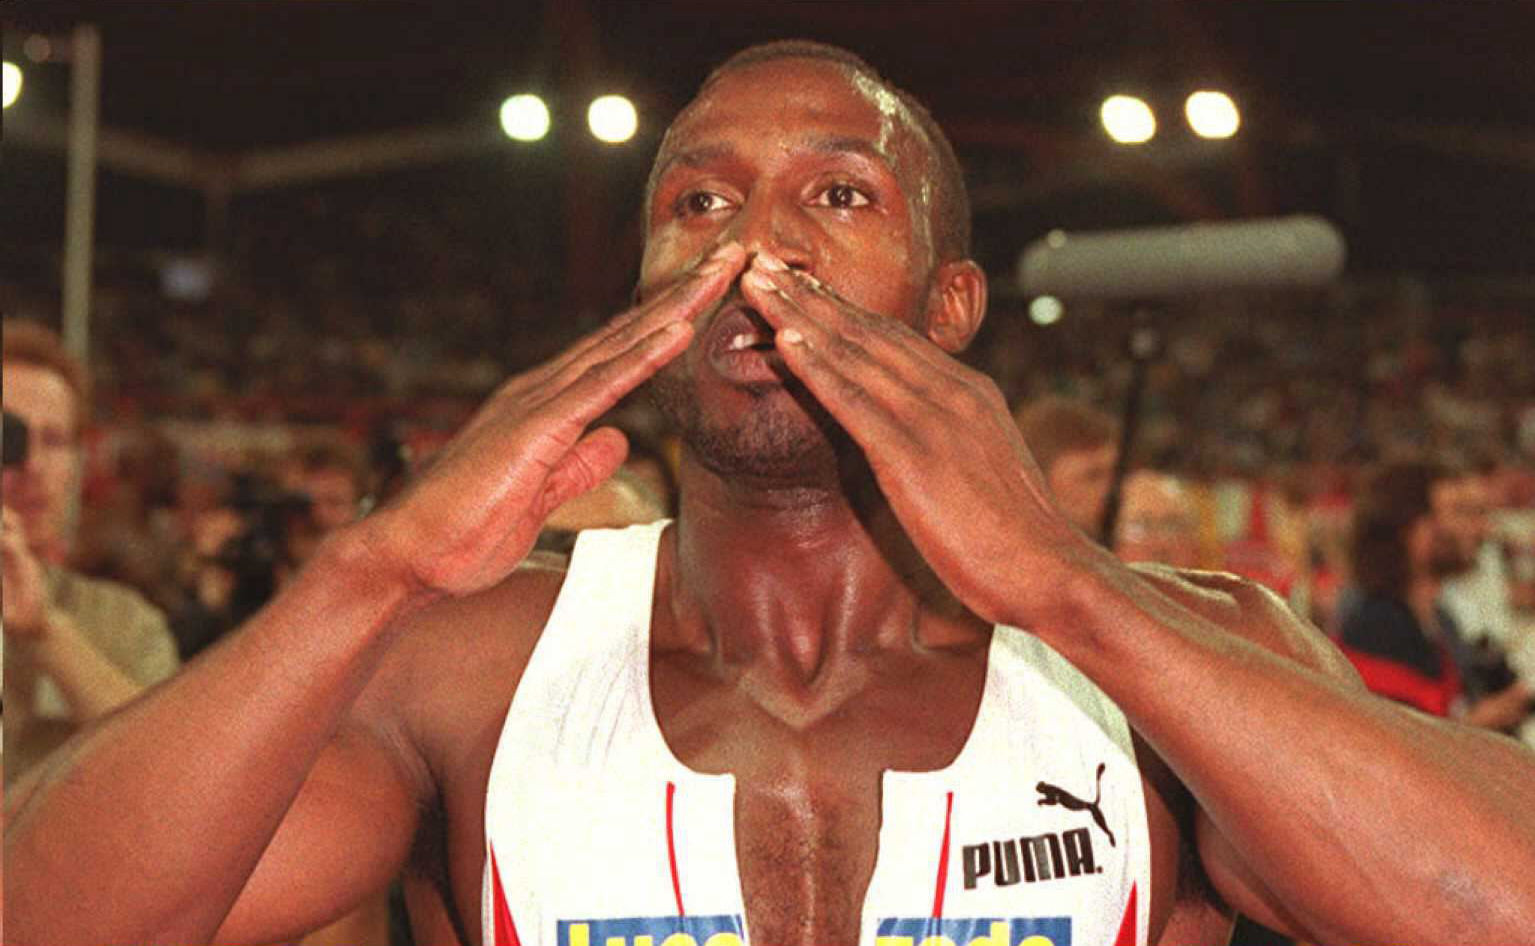 Linford Christie blows kisses to the crowd in Liévin after breaking the world indoor 200m record there in 1995 – one of eight world records that have so far been set in the arena ©Getty Images